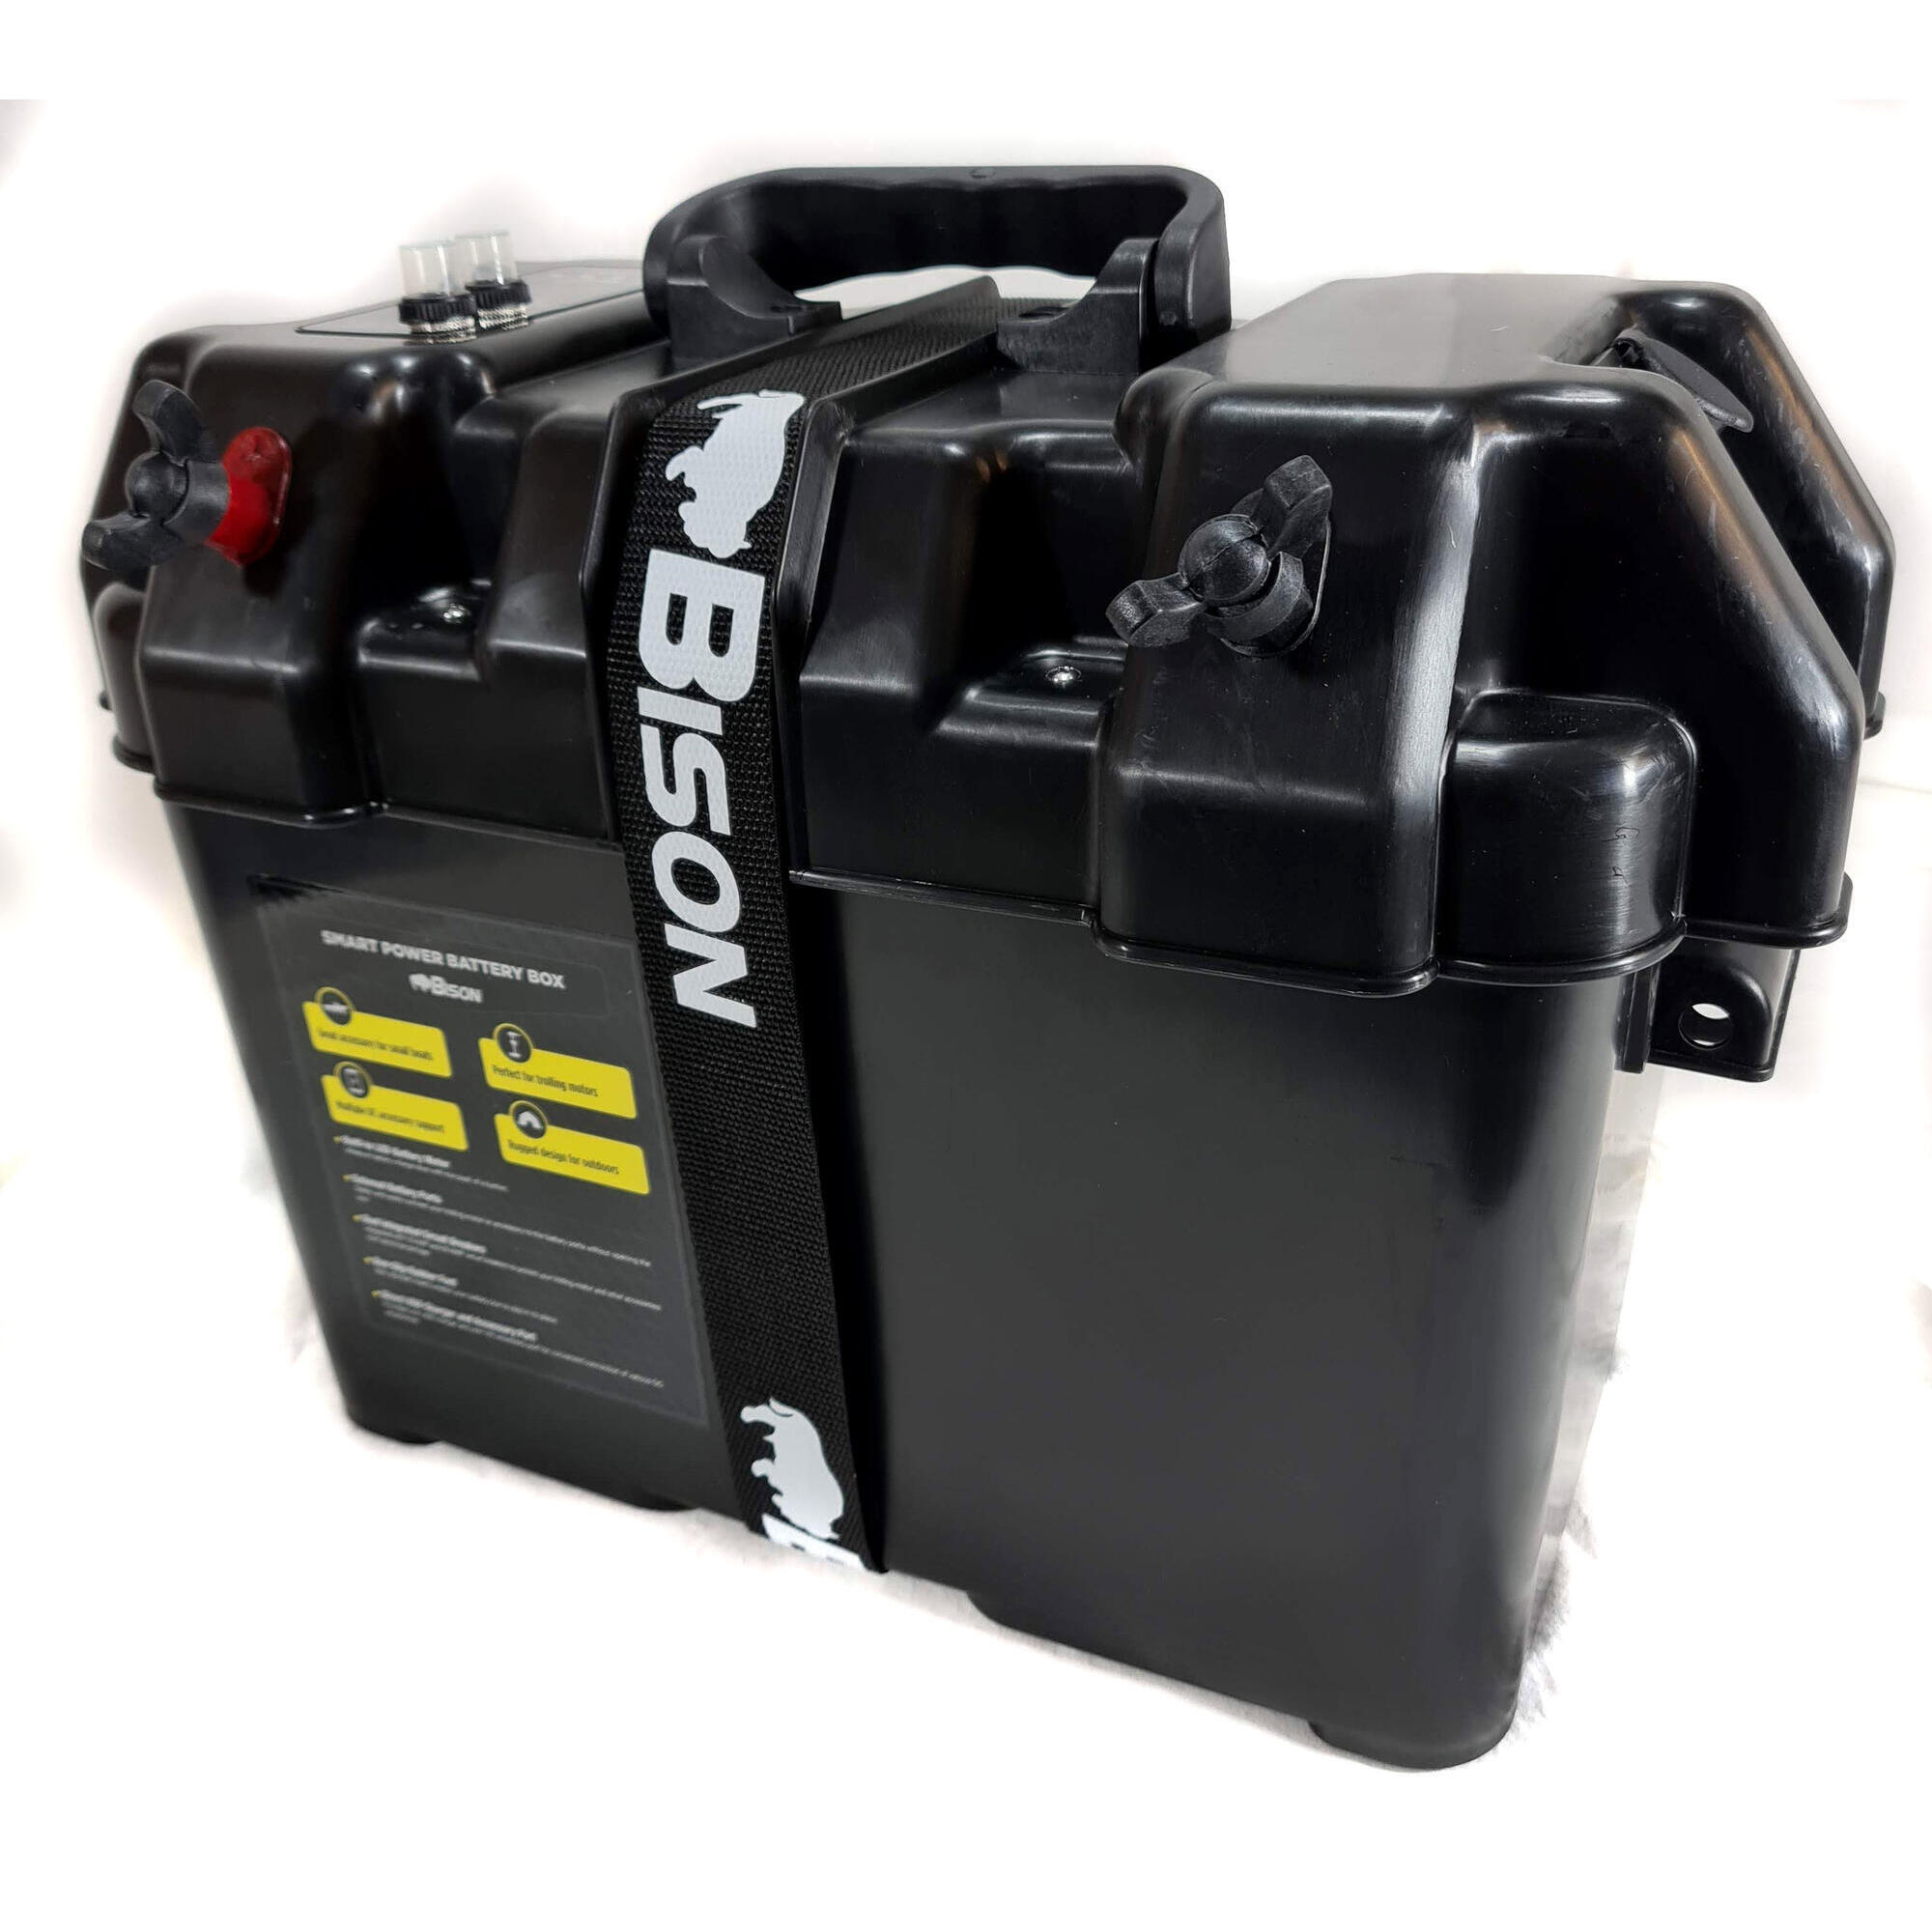 BISON Bison Smart Battery Box with 4 extra USB outputs